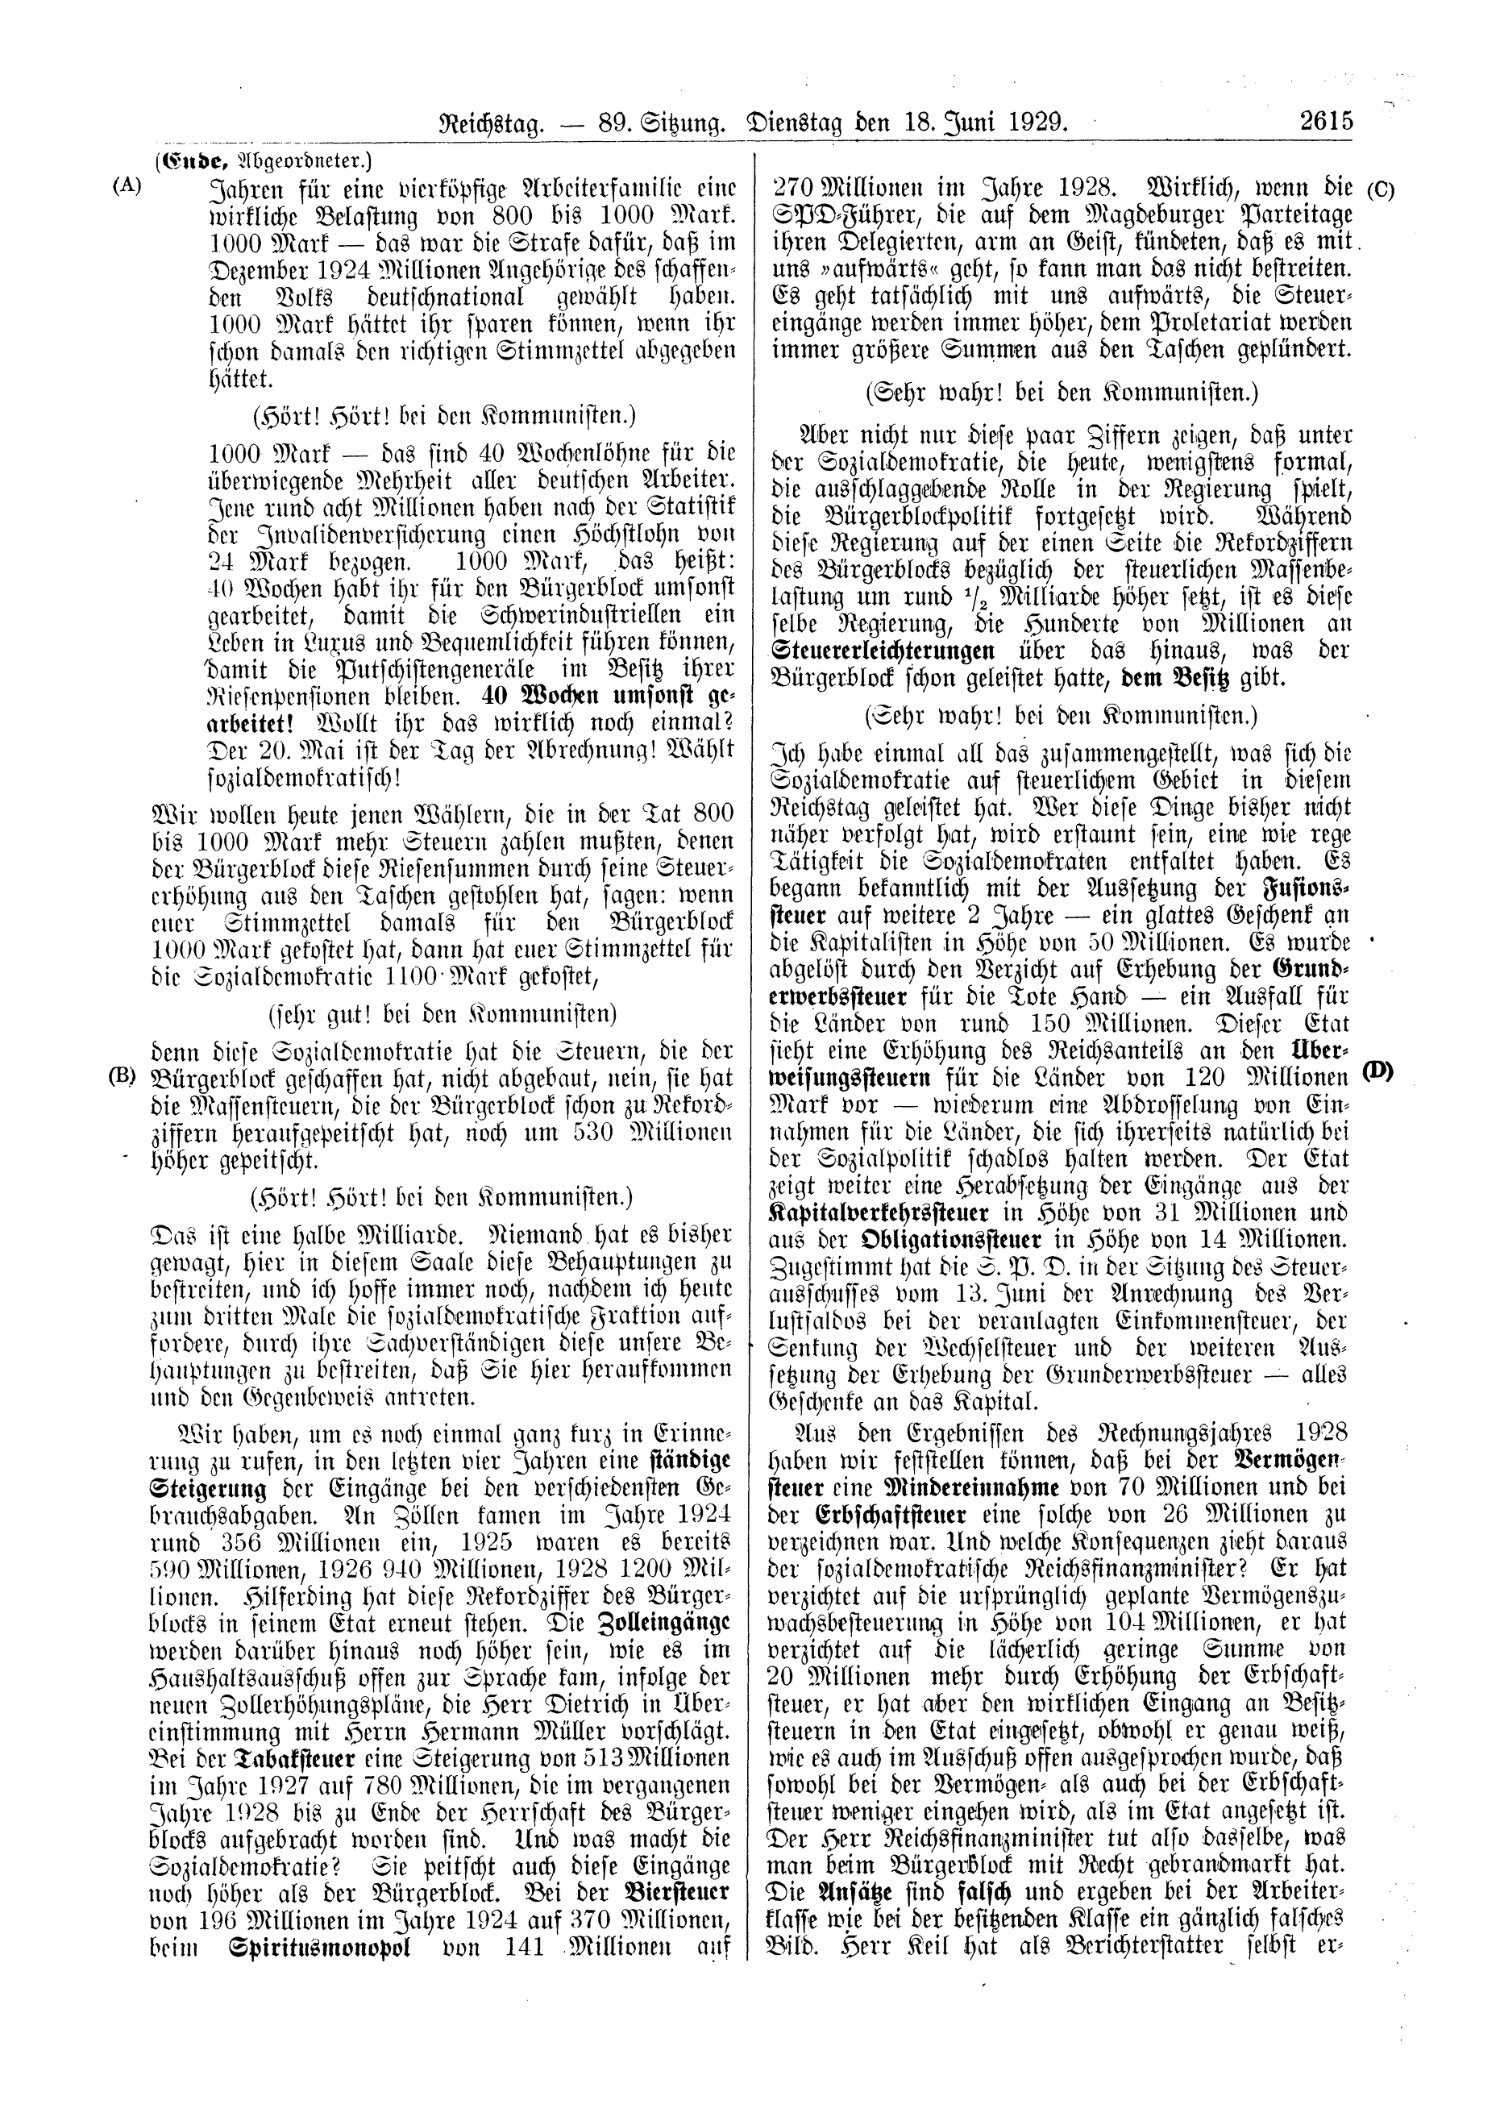 Scan of page 2615